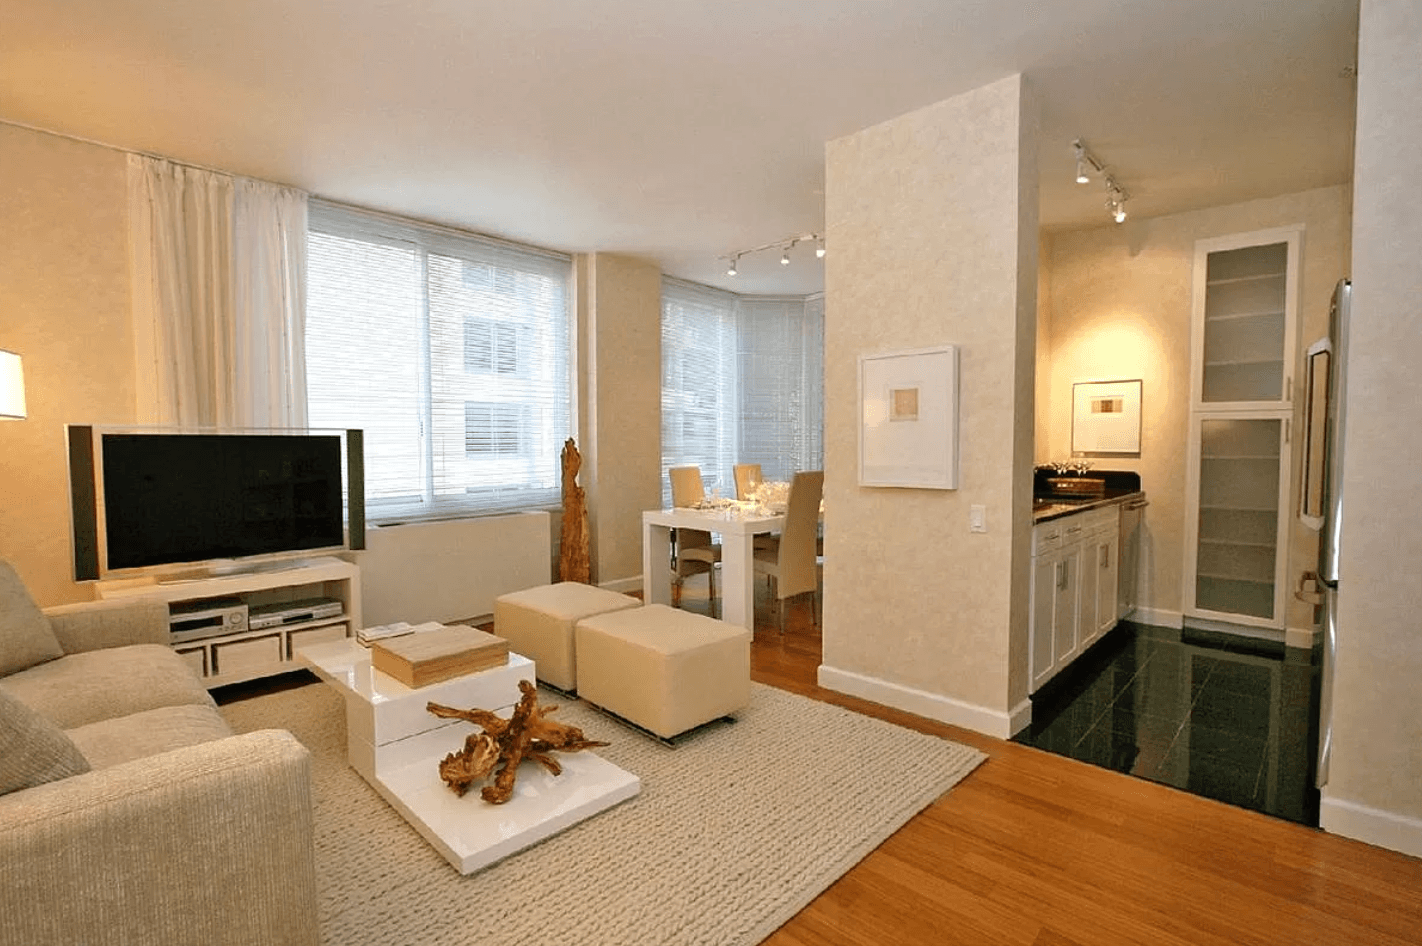 1 Bed/1 Bath in Luxury Amenity Filled Midtown West Building/W/D in Unit